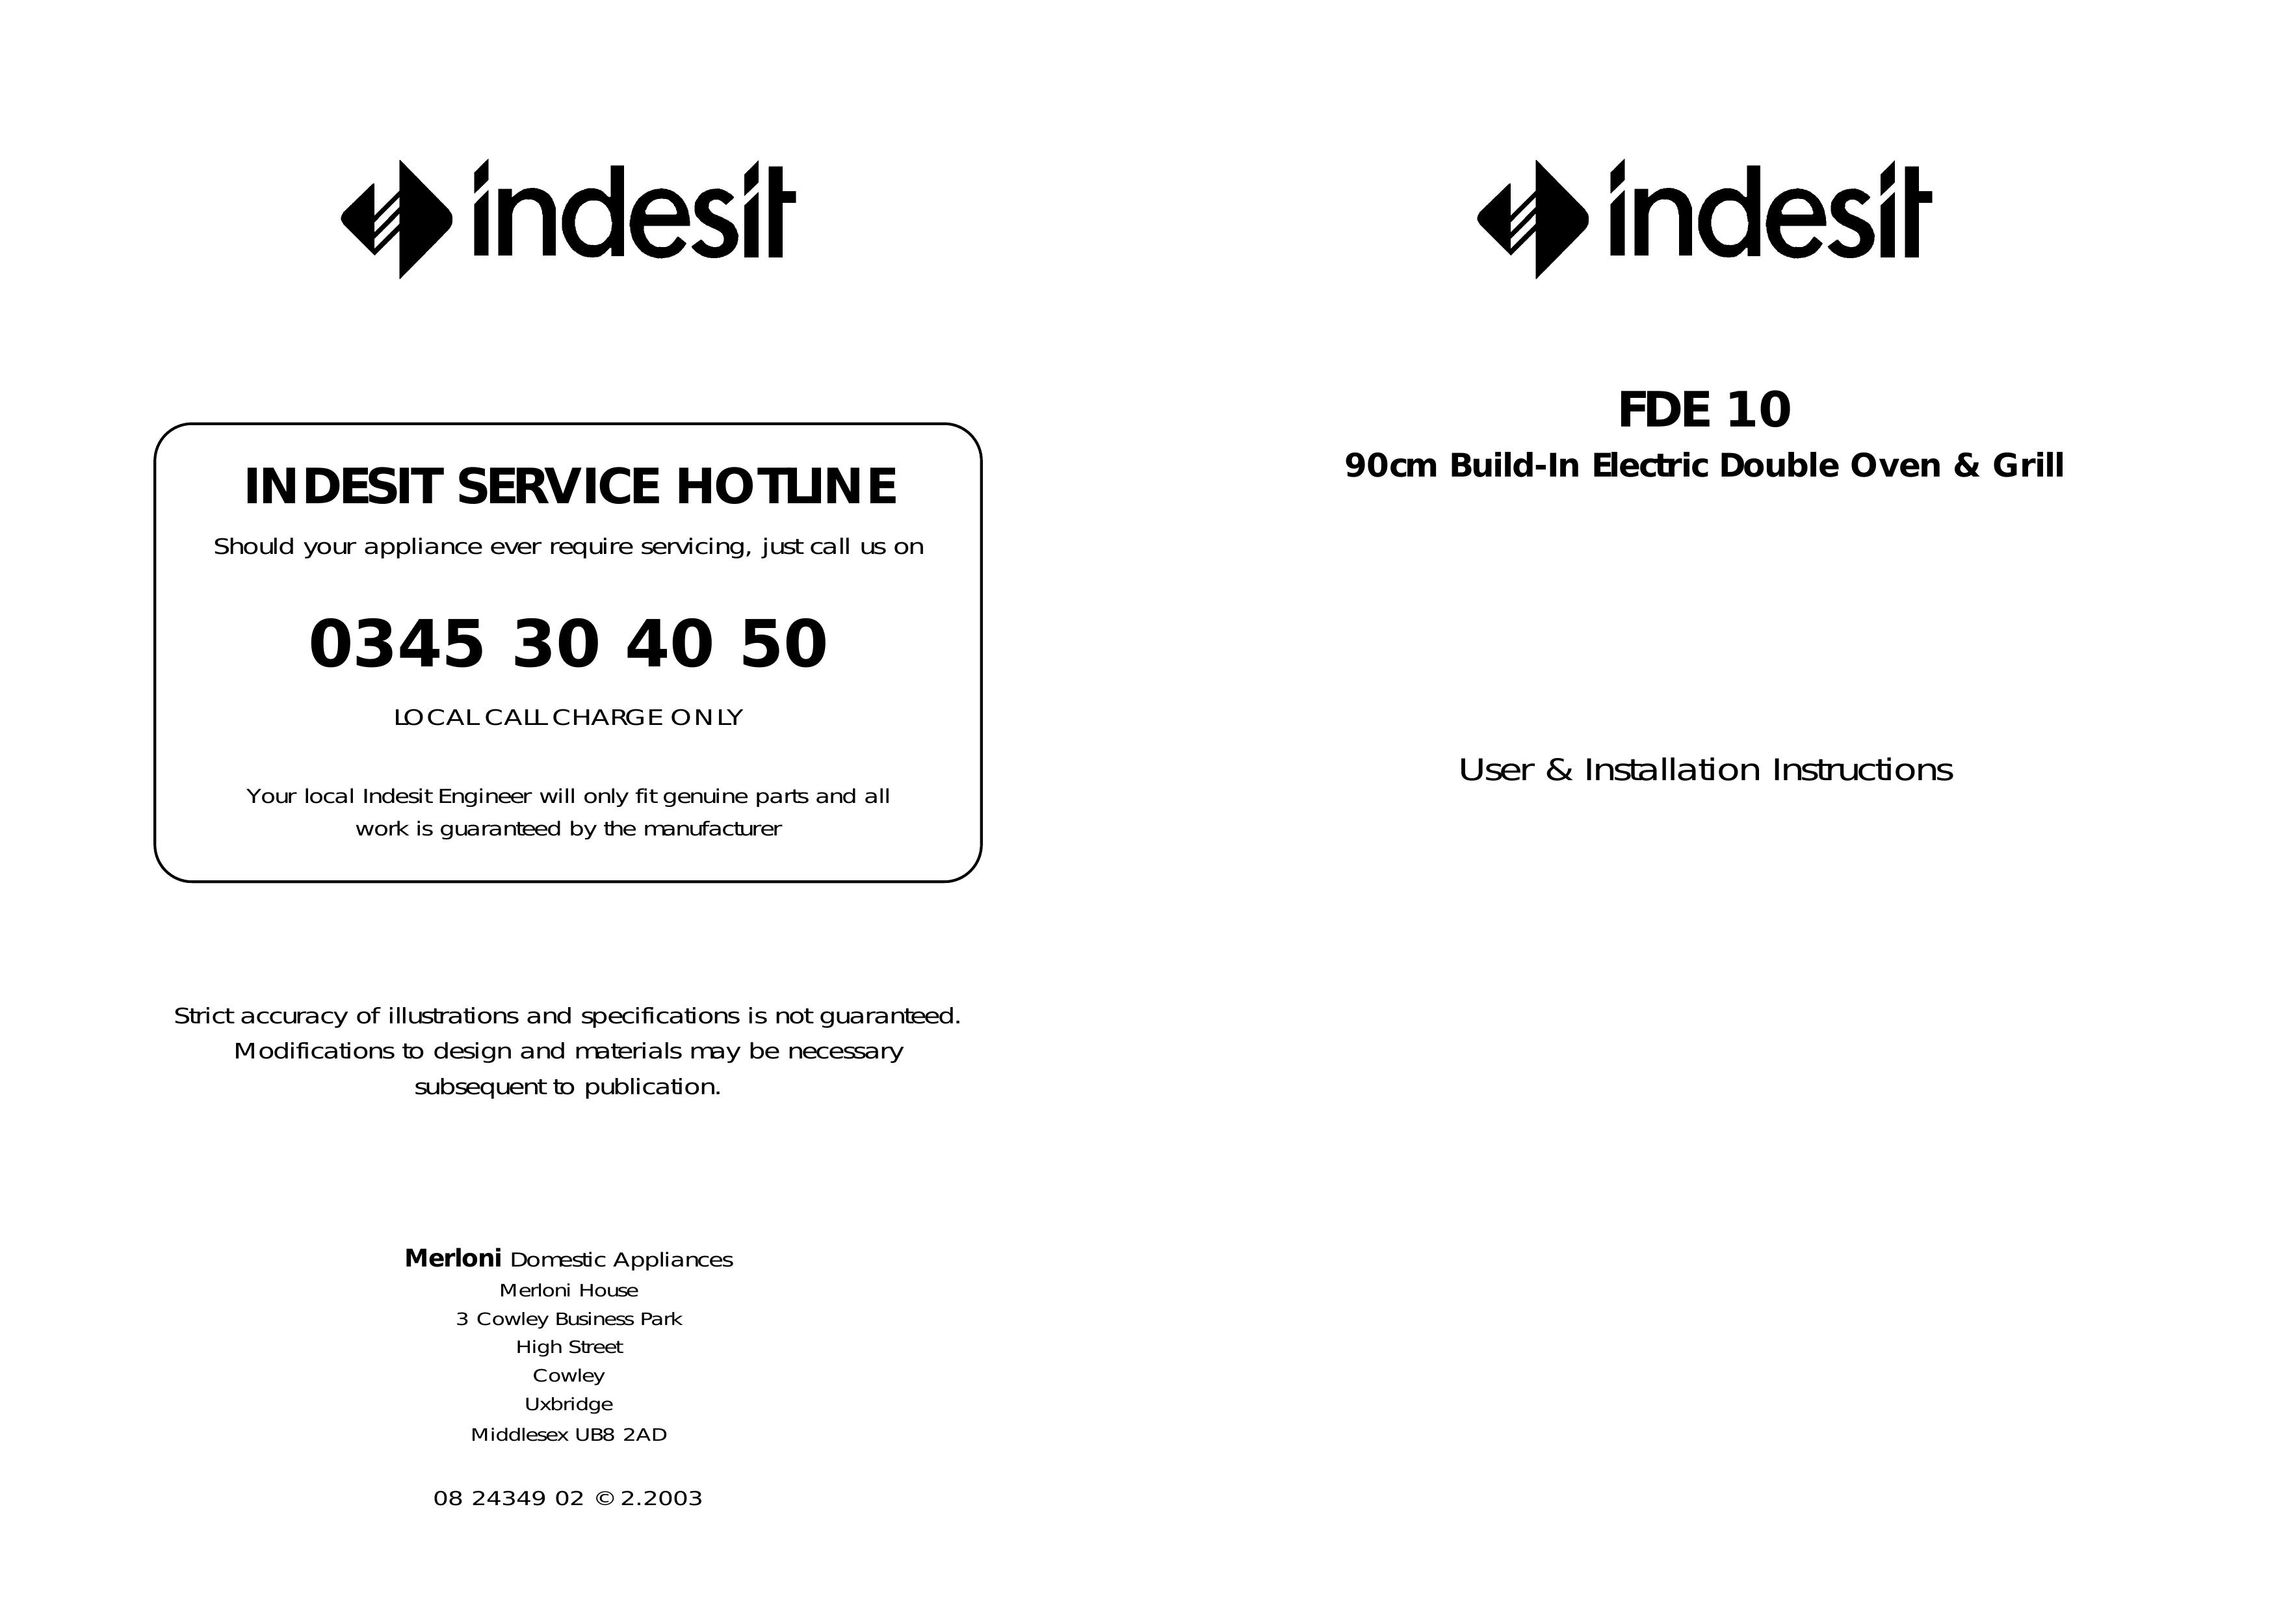 Indesit FDE 10 Oven User Manual